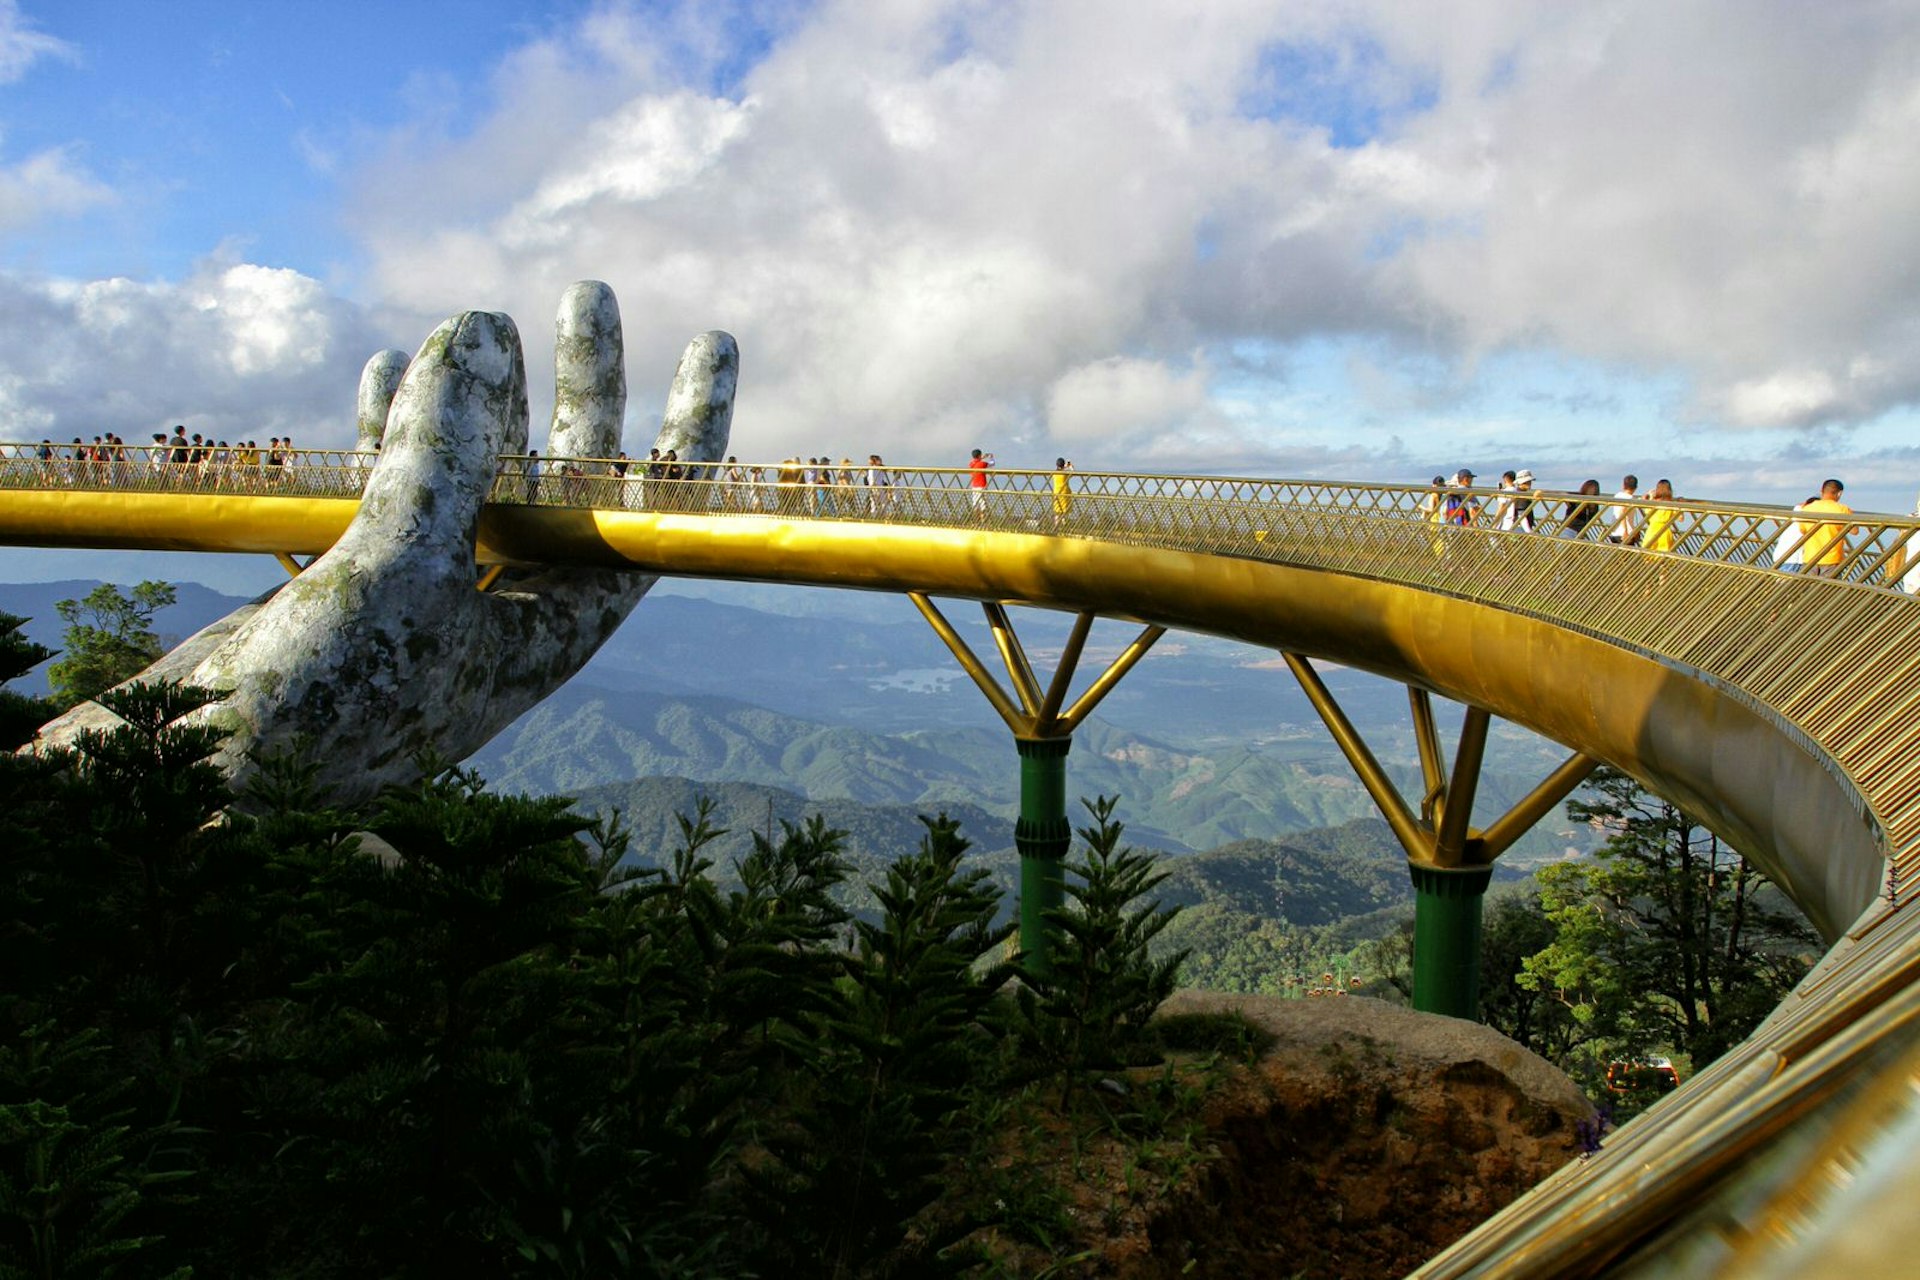 One giant concrete hand can be seen holding the golden walkway of the bridge, as several people enjoy the view of jungle and hills that stretches for miles